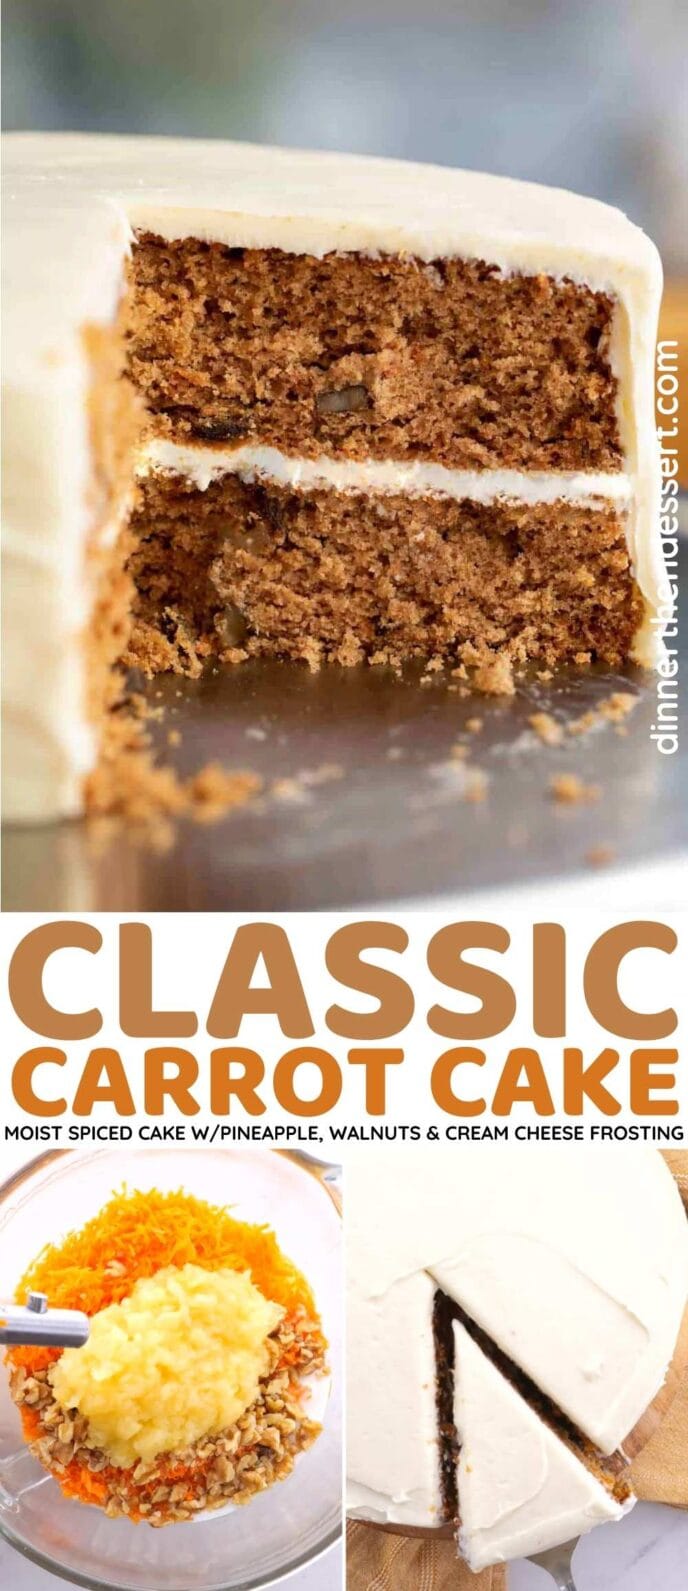 Classic Carrot Cake Collage